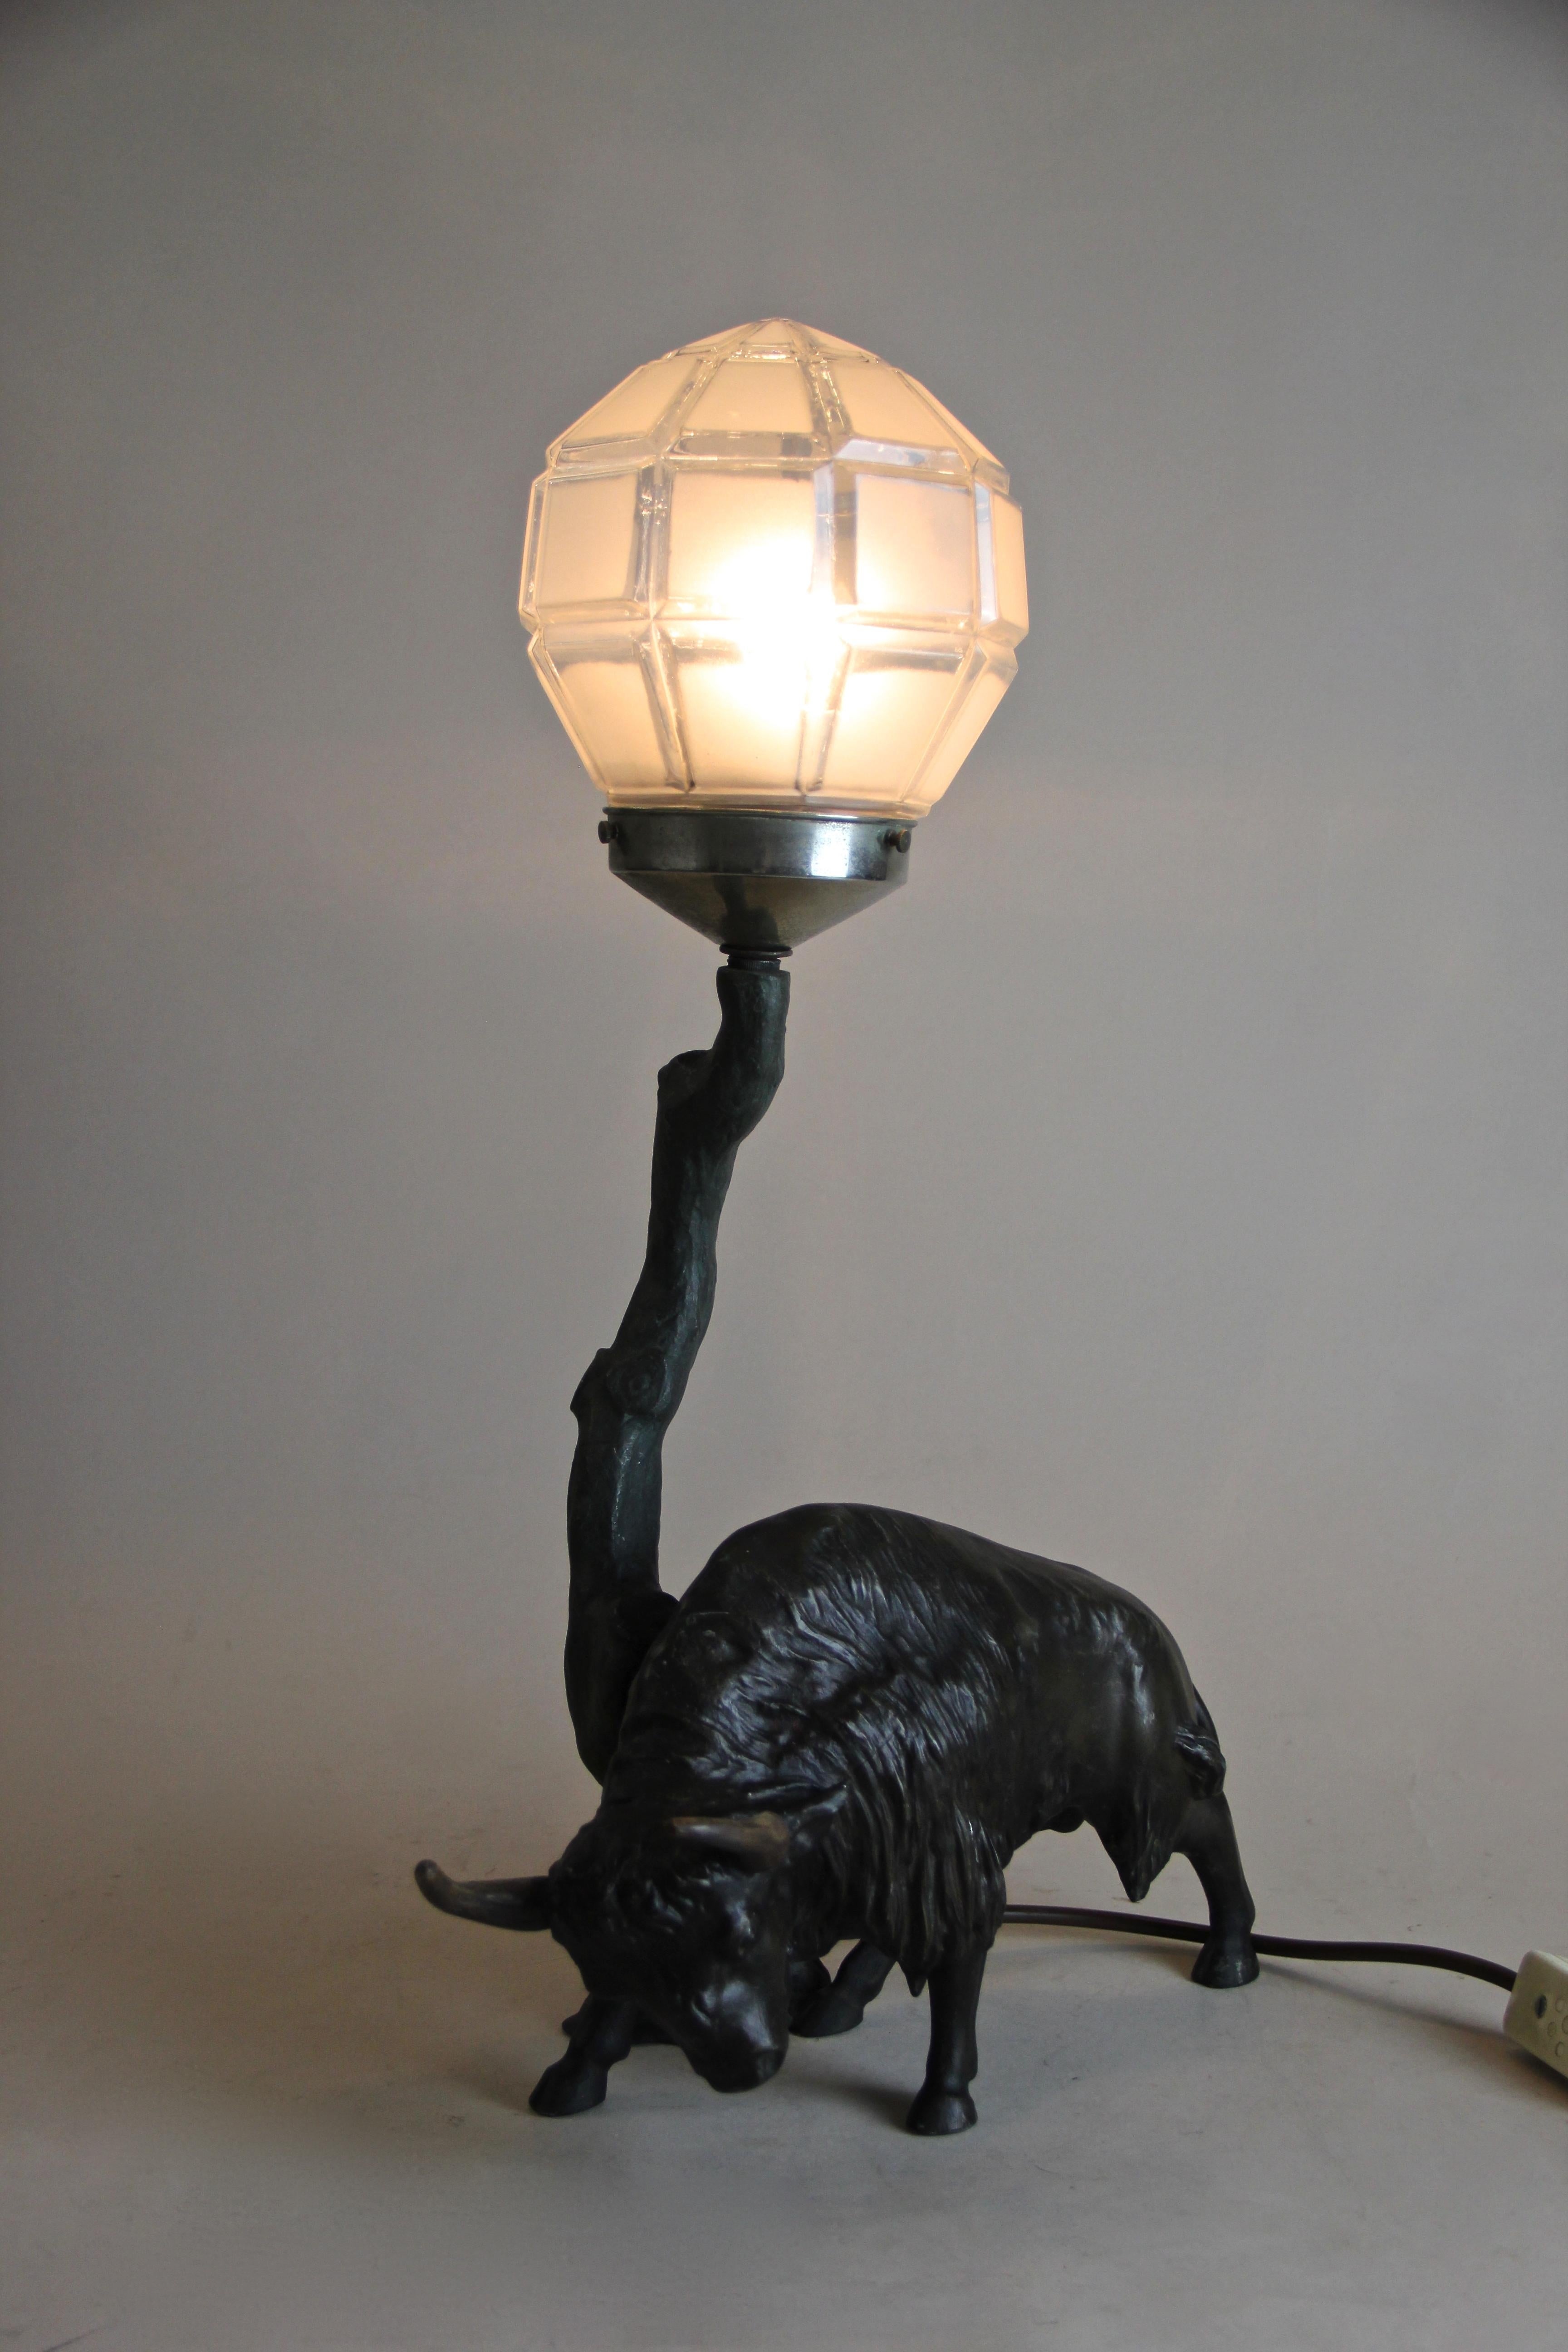 Extraordinary Spelter table lamp from the very early 20th century out of Austria. Depicting a majestic North American bison, this unique table lamp consists of a beautiful designed glass ball which sits on top of a narrow tree trunk, spreading a